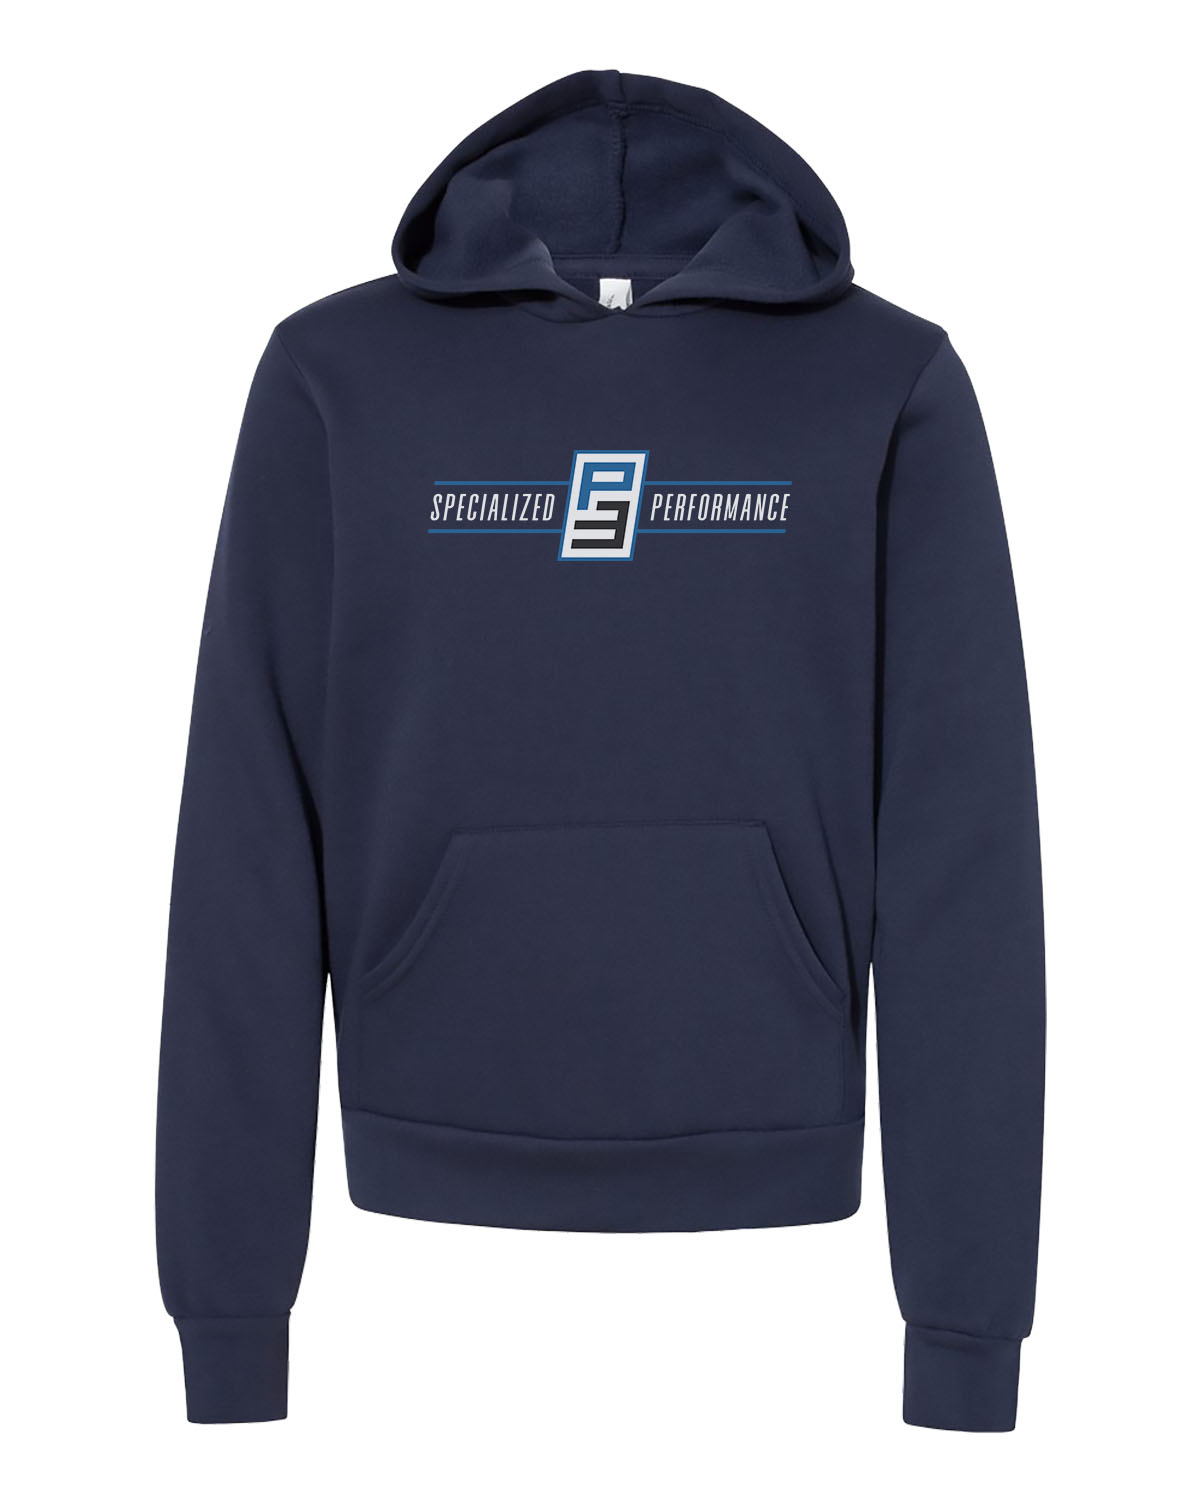 P3 Specialized Performance // Youth Hoodie